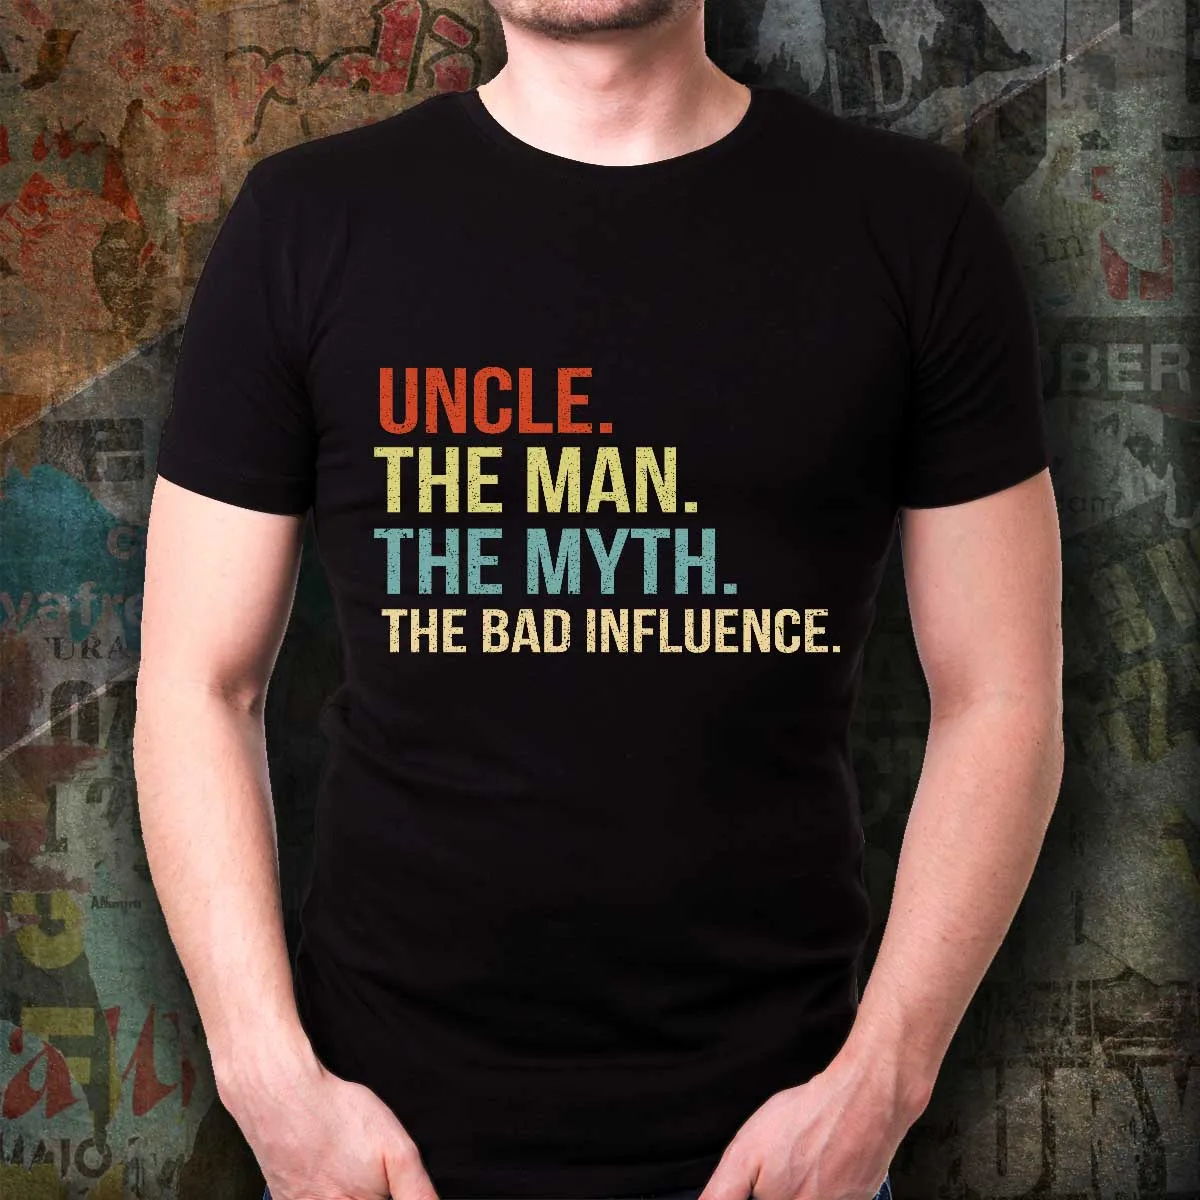 

Uncle The Man Myth Legend T Shirt for Men Tee Gift for Uncle Bad Influence Funny Men 2019 New Short Sleeve Hipster Male Tees